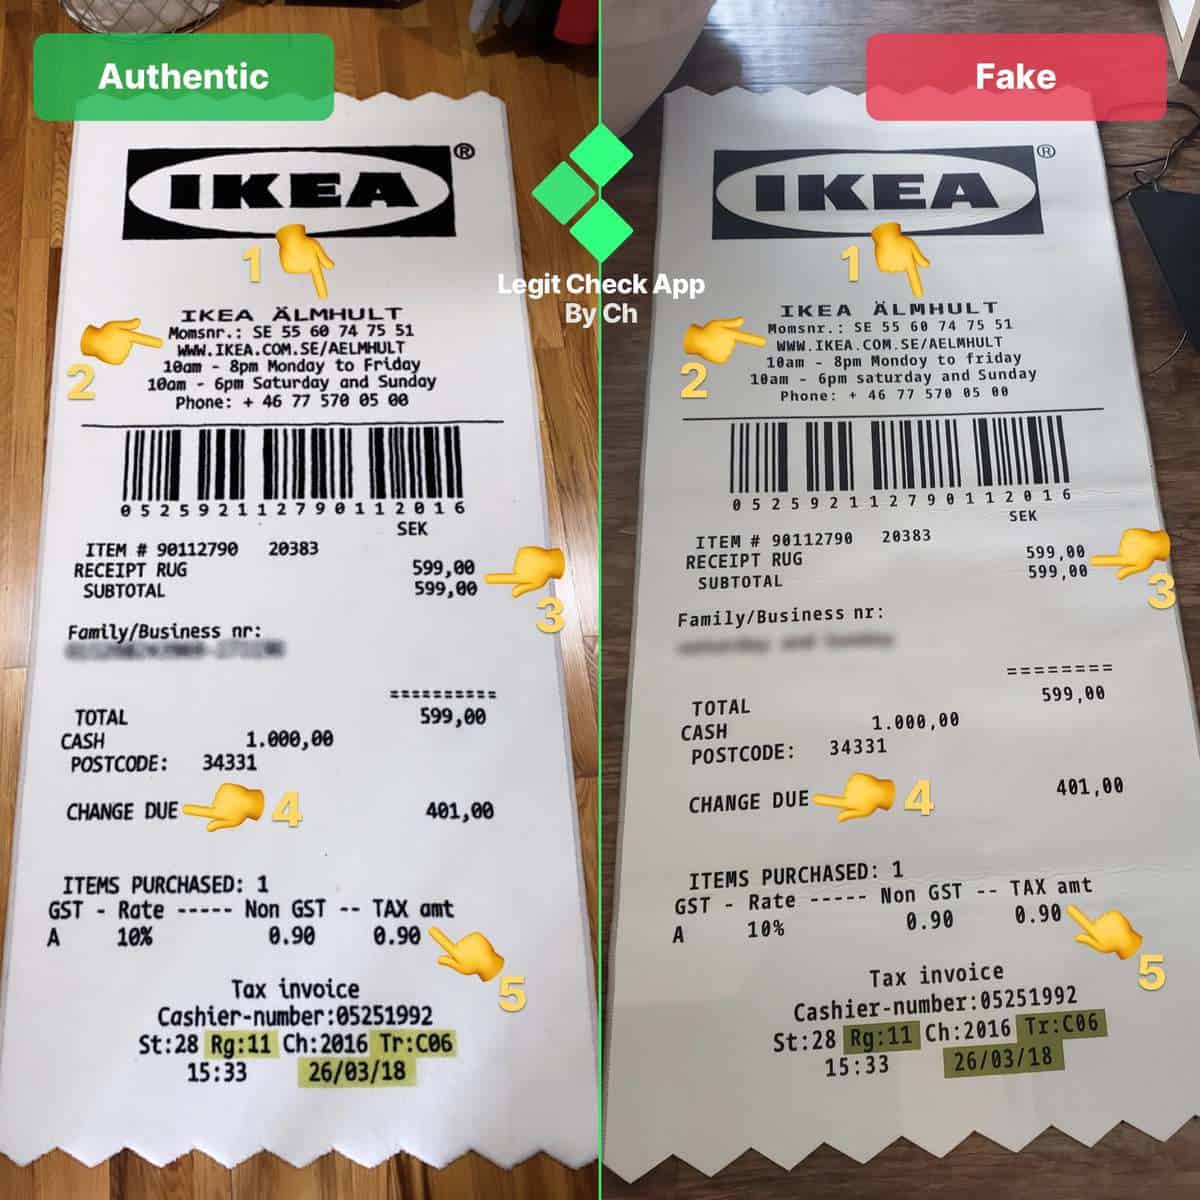 MARKERAD X Off-White Receipt Rug Fake Vs Real - How To Spot Fake Off- White Rugs - Legit Check By Ch